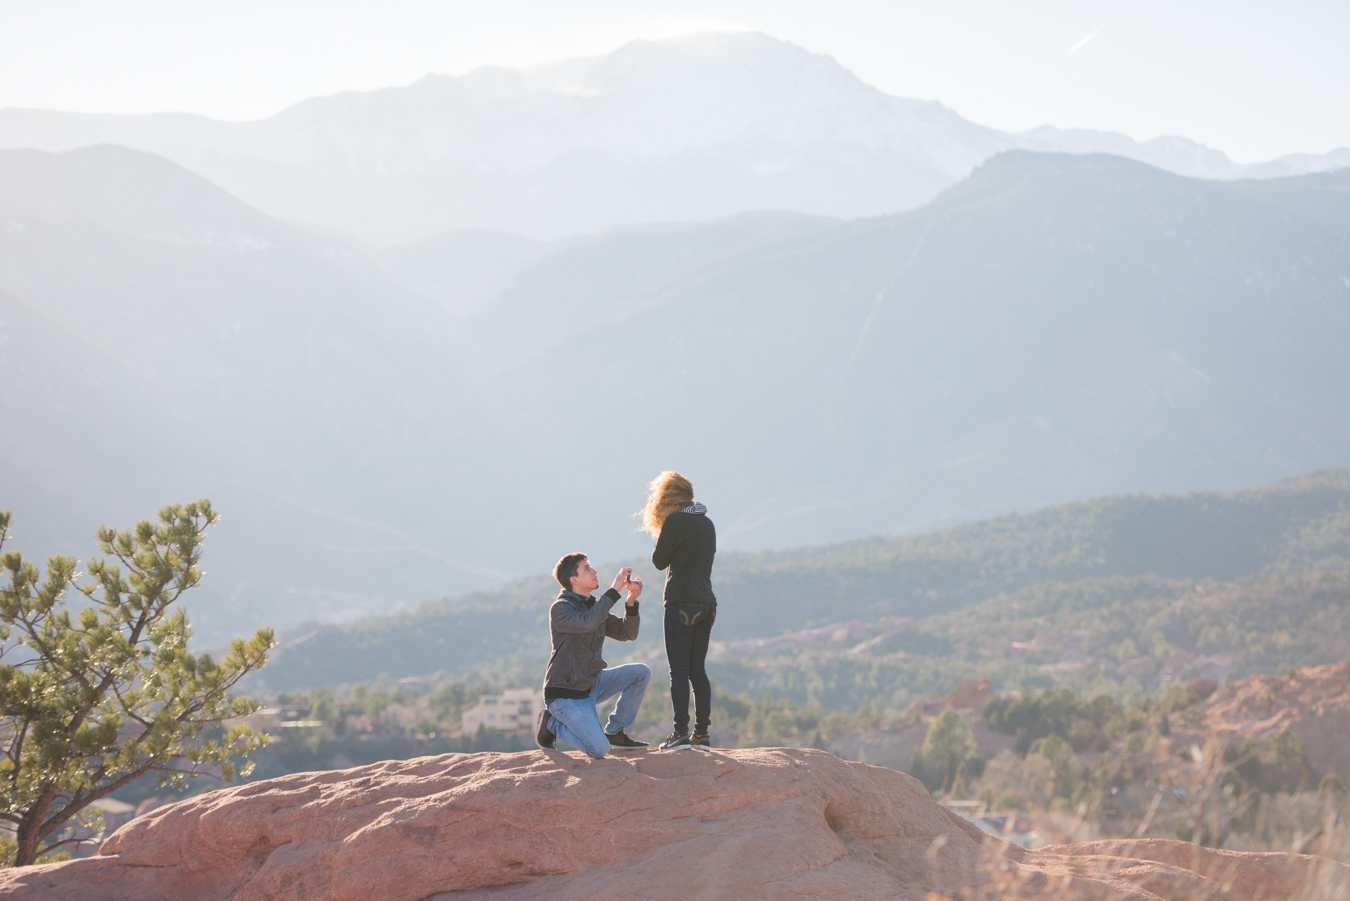 High Point Overlook in Colorado Springs Outside Garden of ...